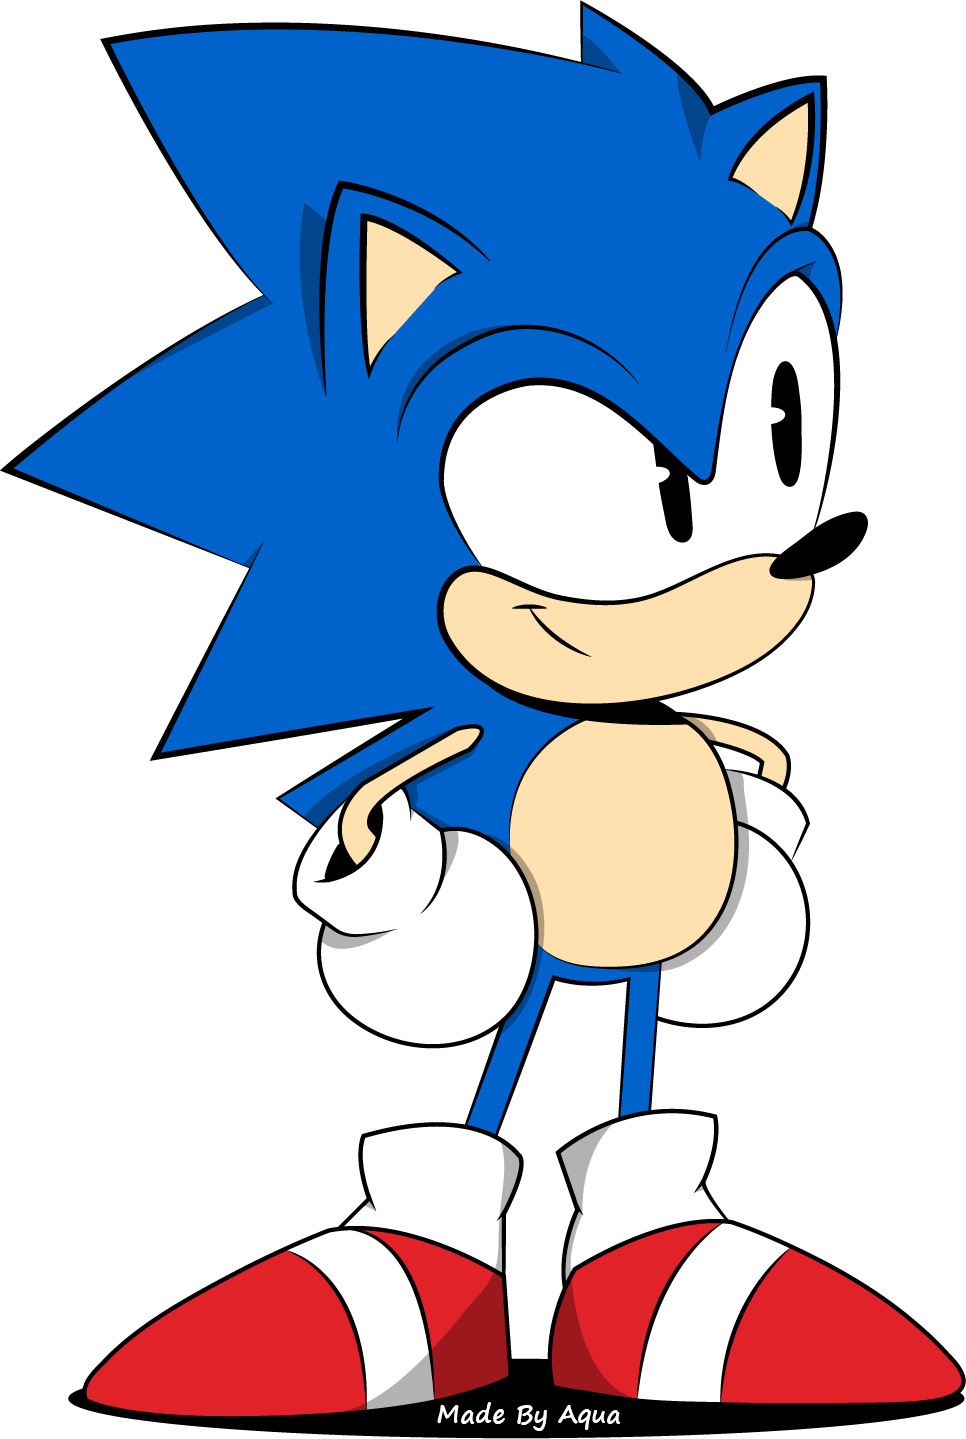 Classic Sonic (Sonic 2 Pose) by MatiPrower on DeviantArt